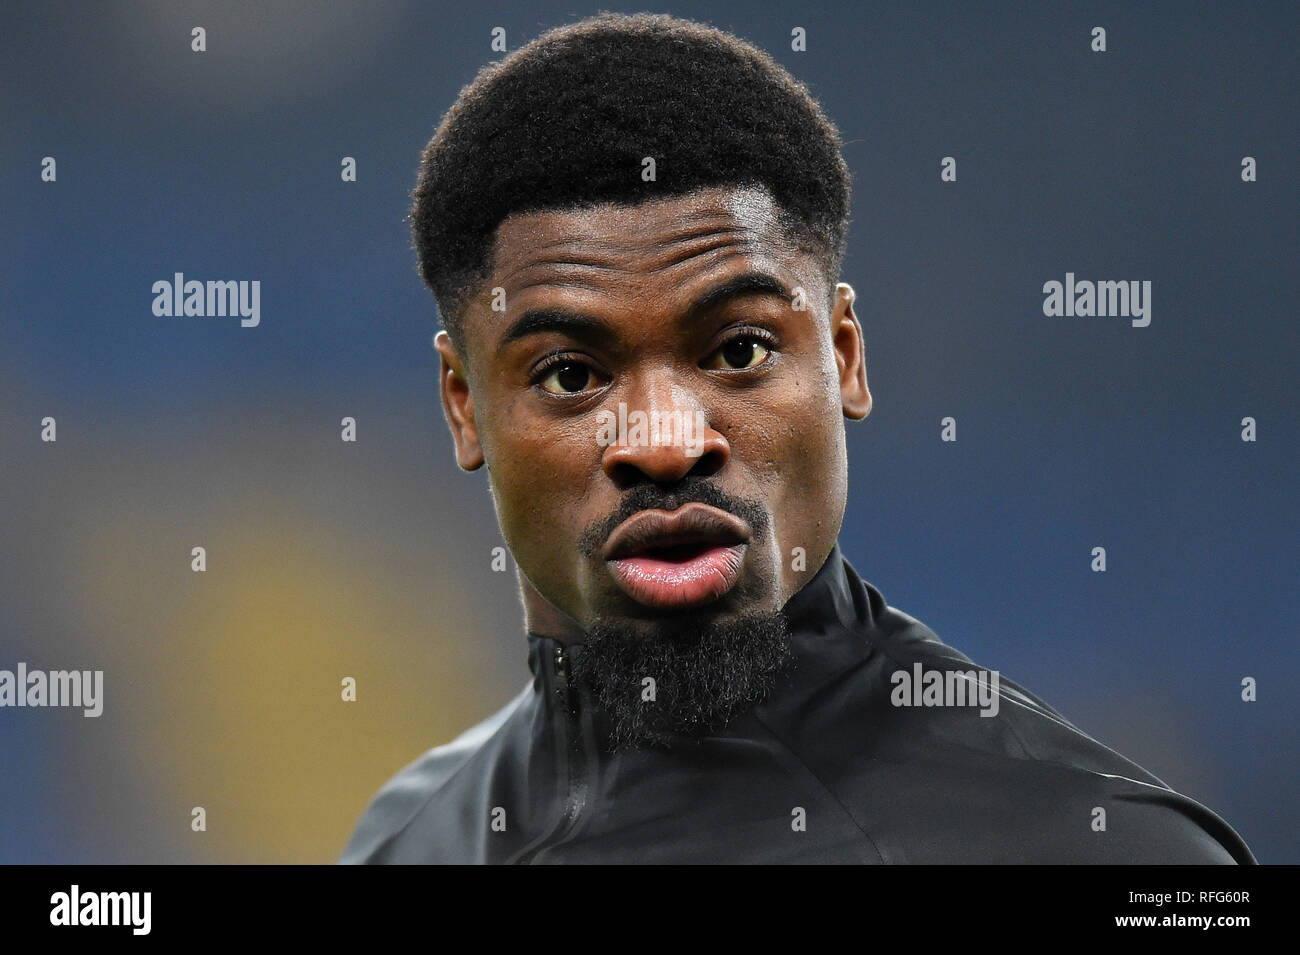 LONDON, UK 24 JANUARY Tottenham defender Serge Aurier warms up during the Carabao Cup match between Chelsea and Tottenham Hotspur at Stamford Bridge, London on Thursday 24th January 2019. (Photo Credit: MI News & Sport) Stock Photo